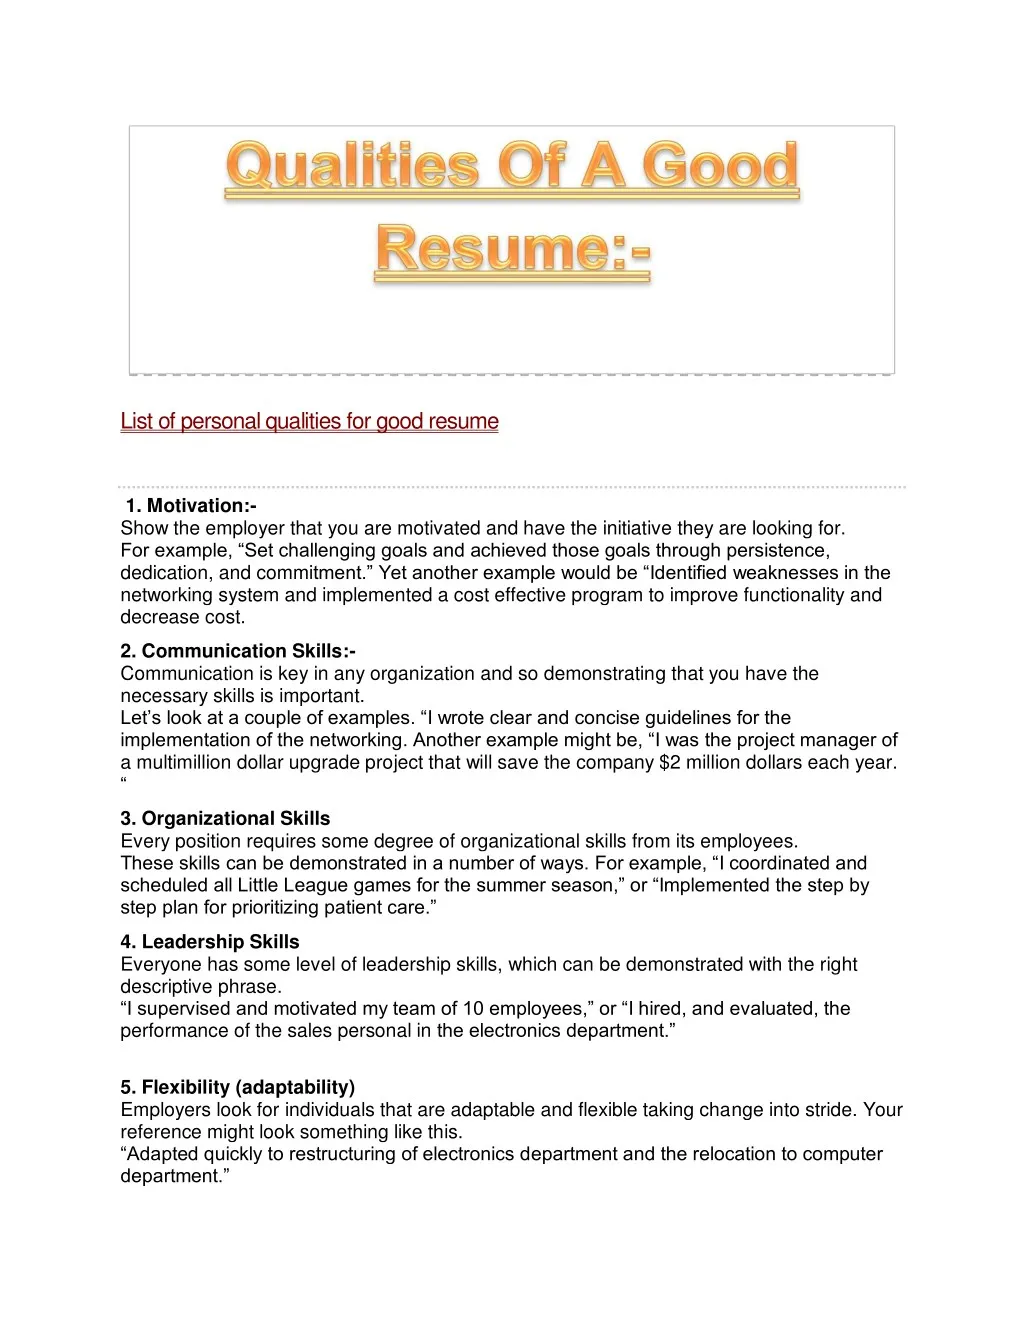 list of personal qualities for good resume